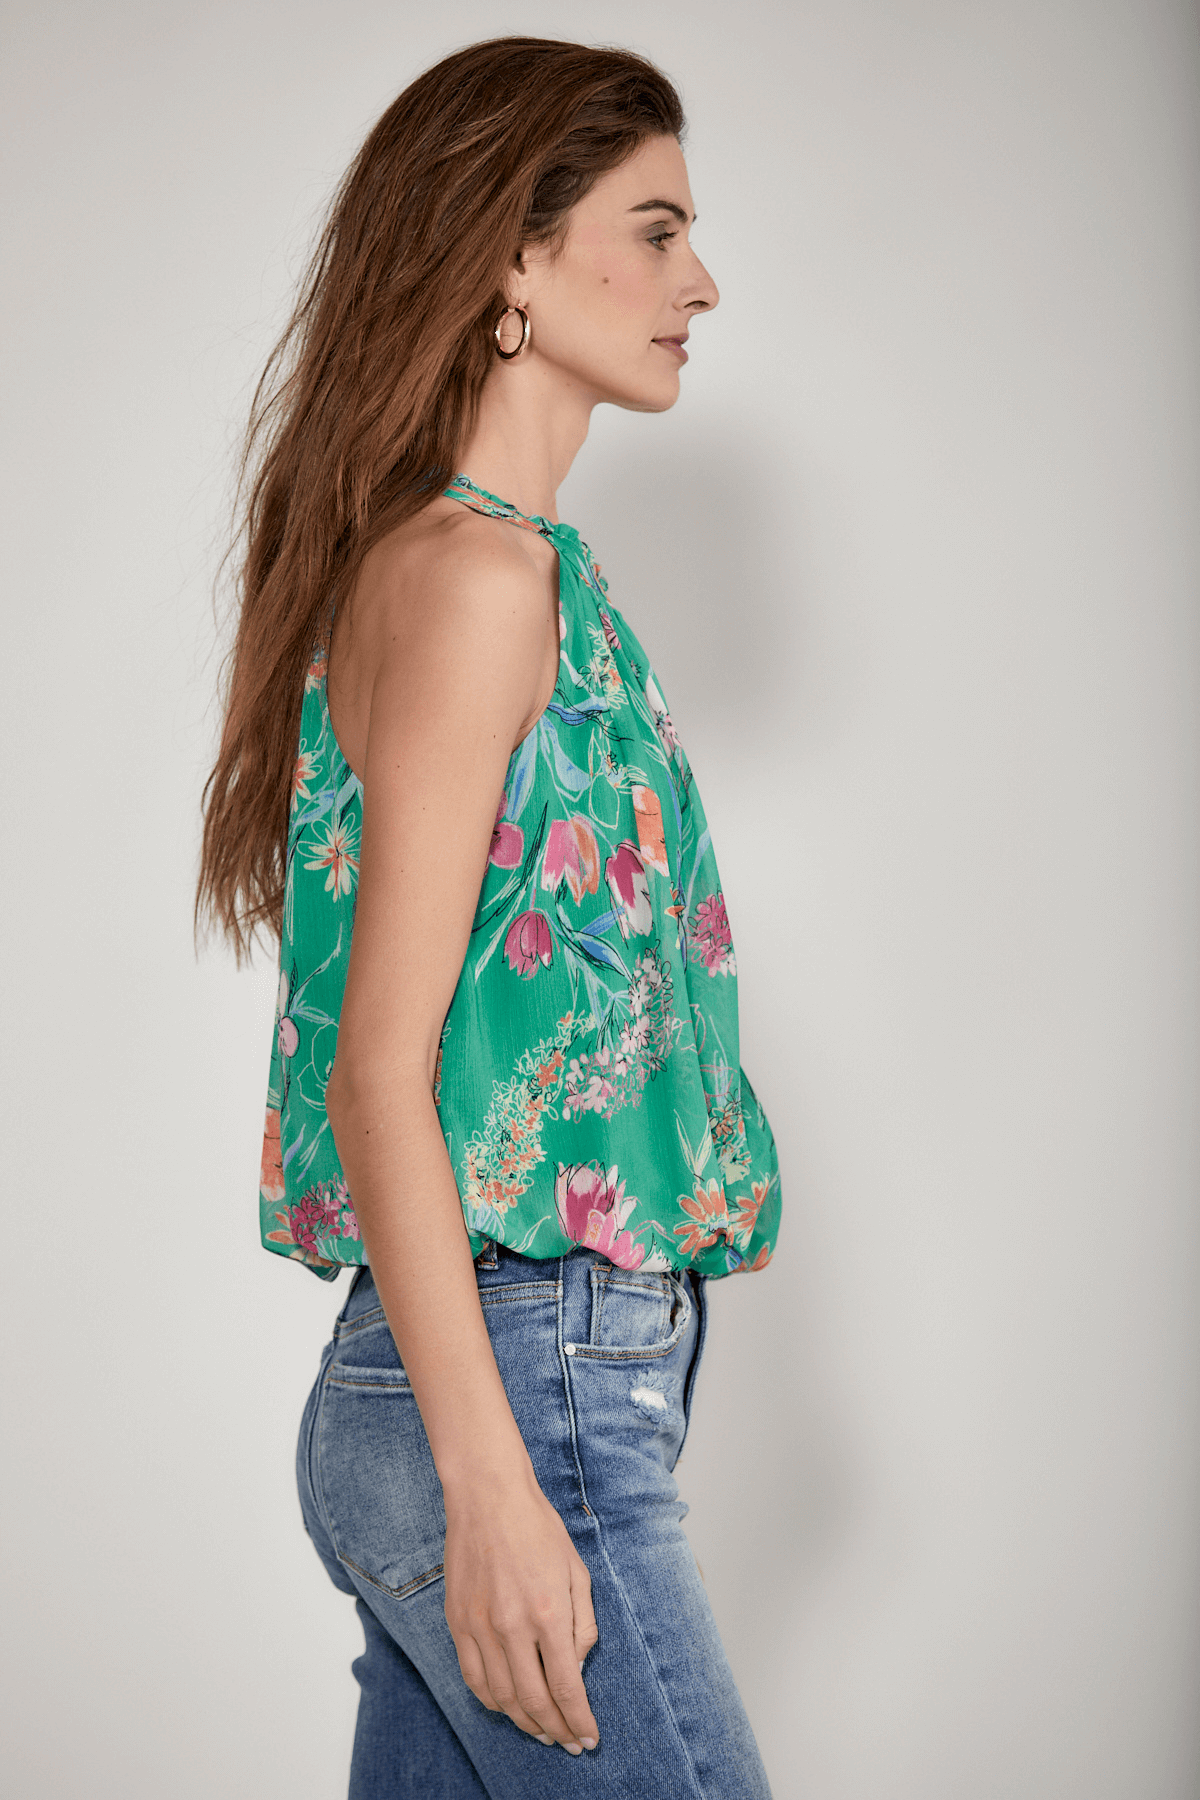 Fate Halter Printed Bubble Waist Top